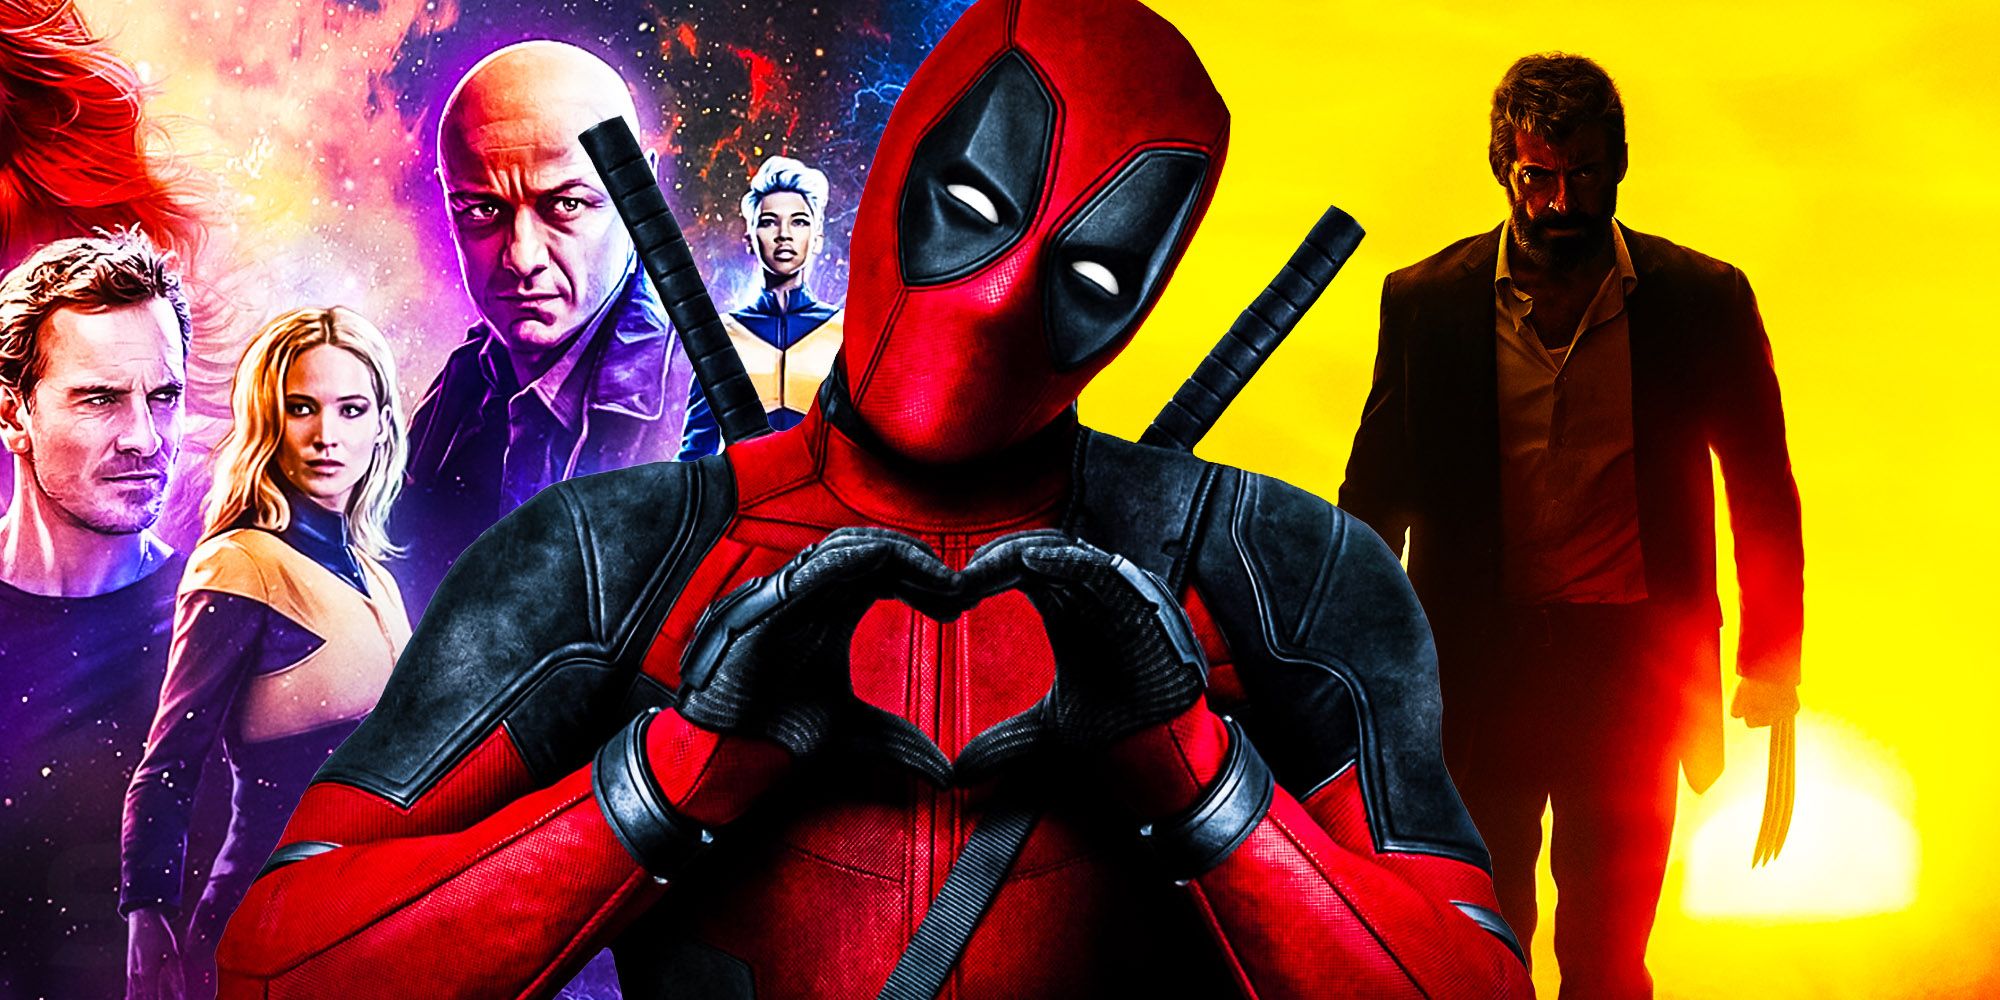 The Fox X-Men Movies Aren't Dead, After All